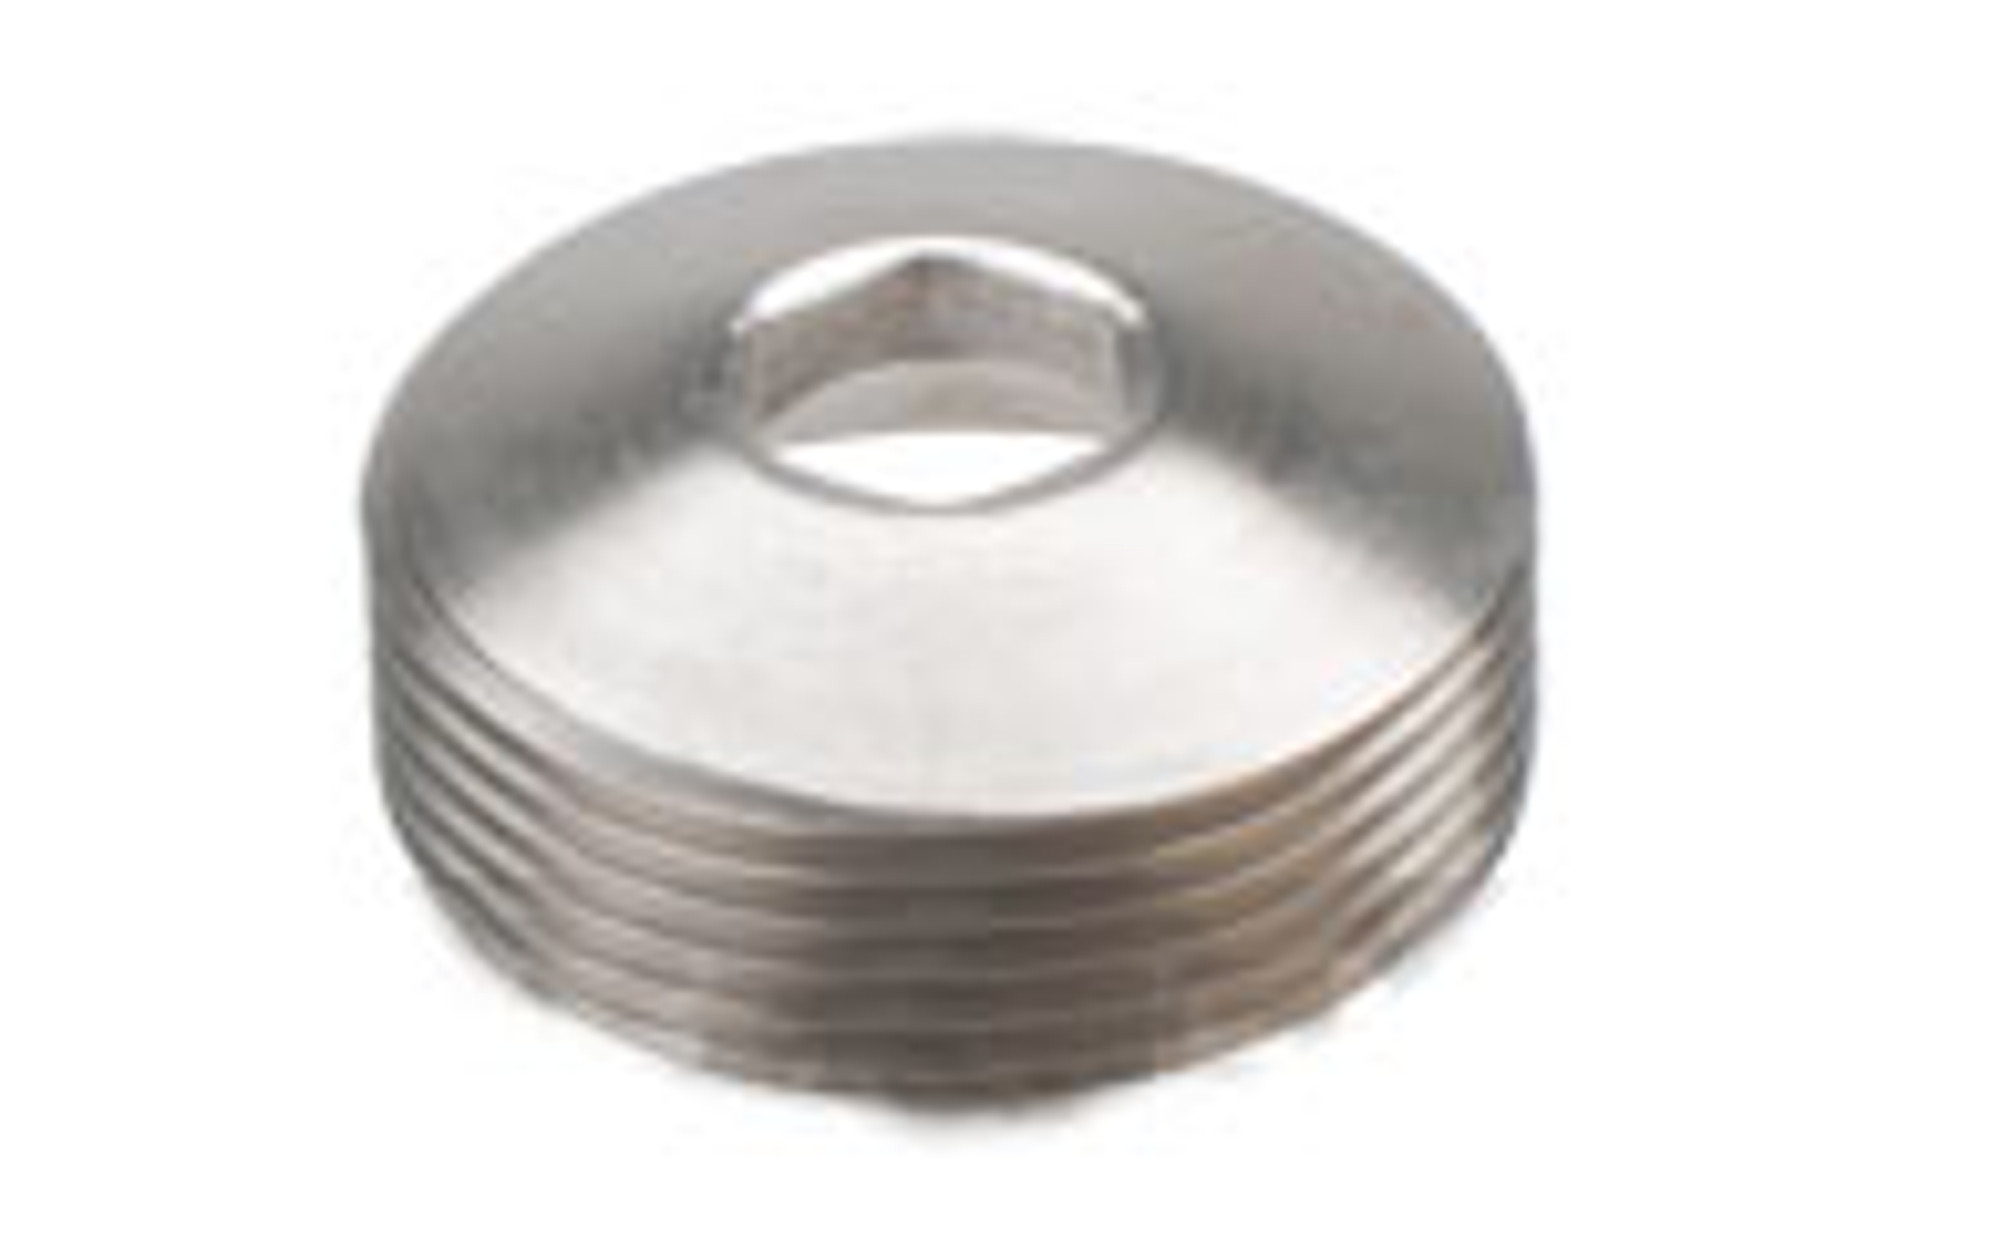 RA-Tech Stainless Steel Bottom Cap for WE17 Airsoft GBB Pistols